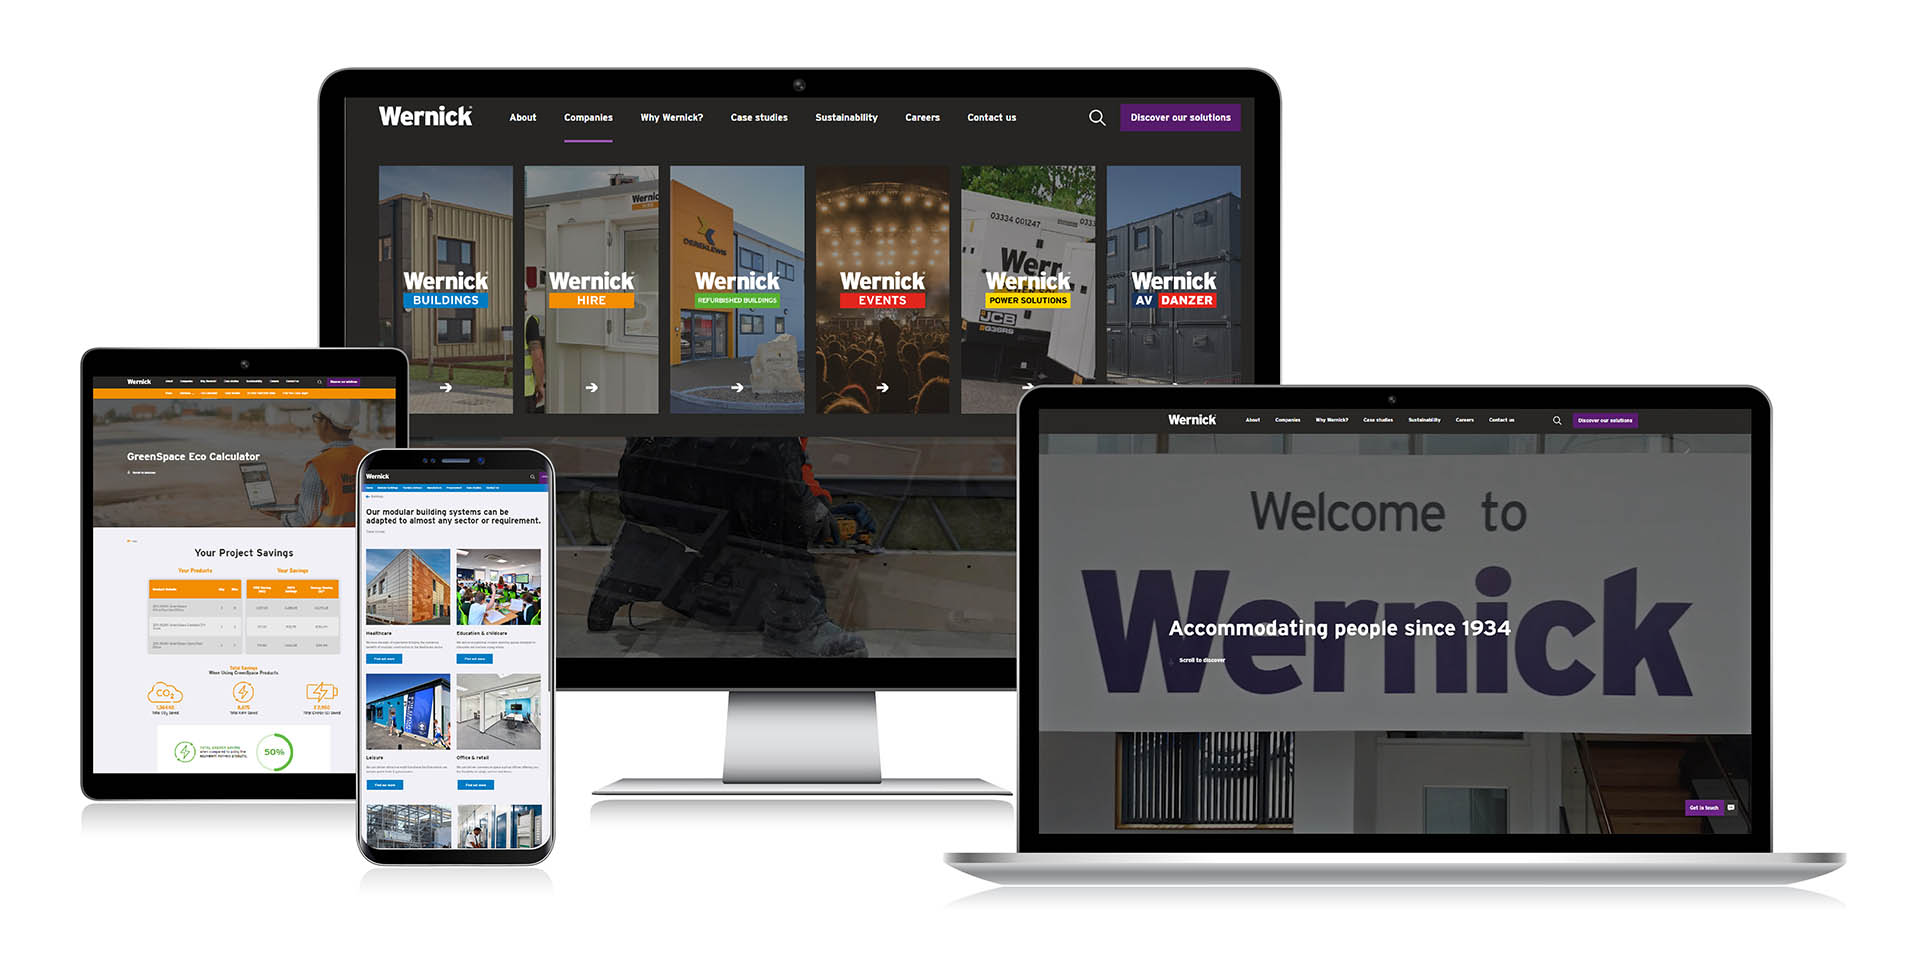 The Wernick Group launches new website